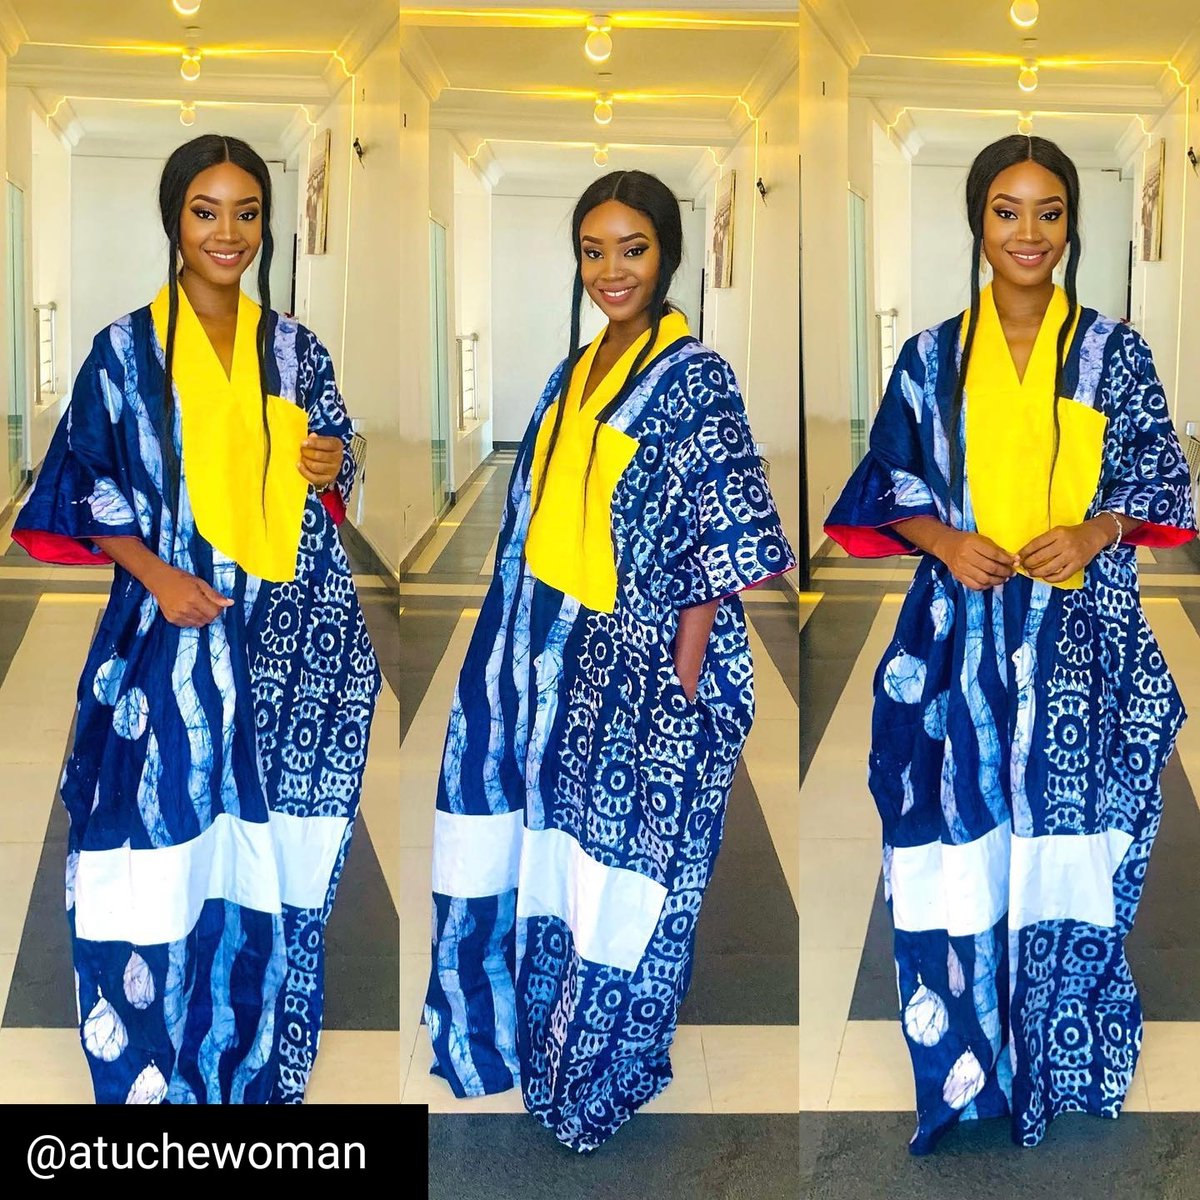 Don't You Just Adore This Adire Print Dress by @atuchewoman 
Download #AfriqOkin free and find Tailors, designers or Accessory makers in your local area to help bring your designs to life!

👉🏾 onelink.to/dut9rz 👈🏾

 #AfricanFashion #Afriqokin #AfricanFashionApp #bellanaija